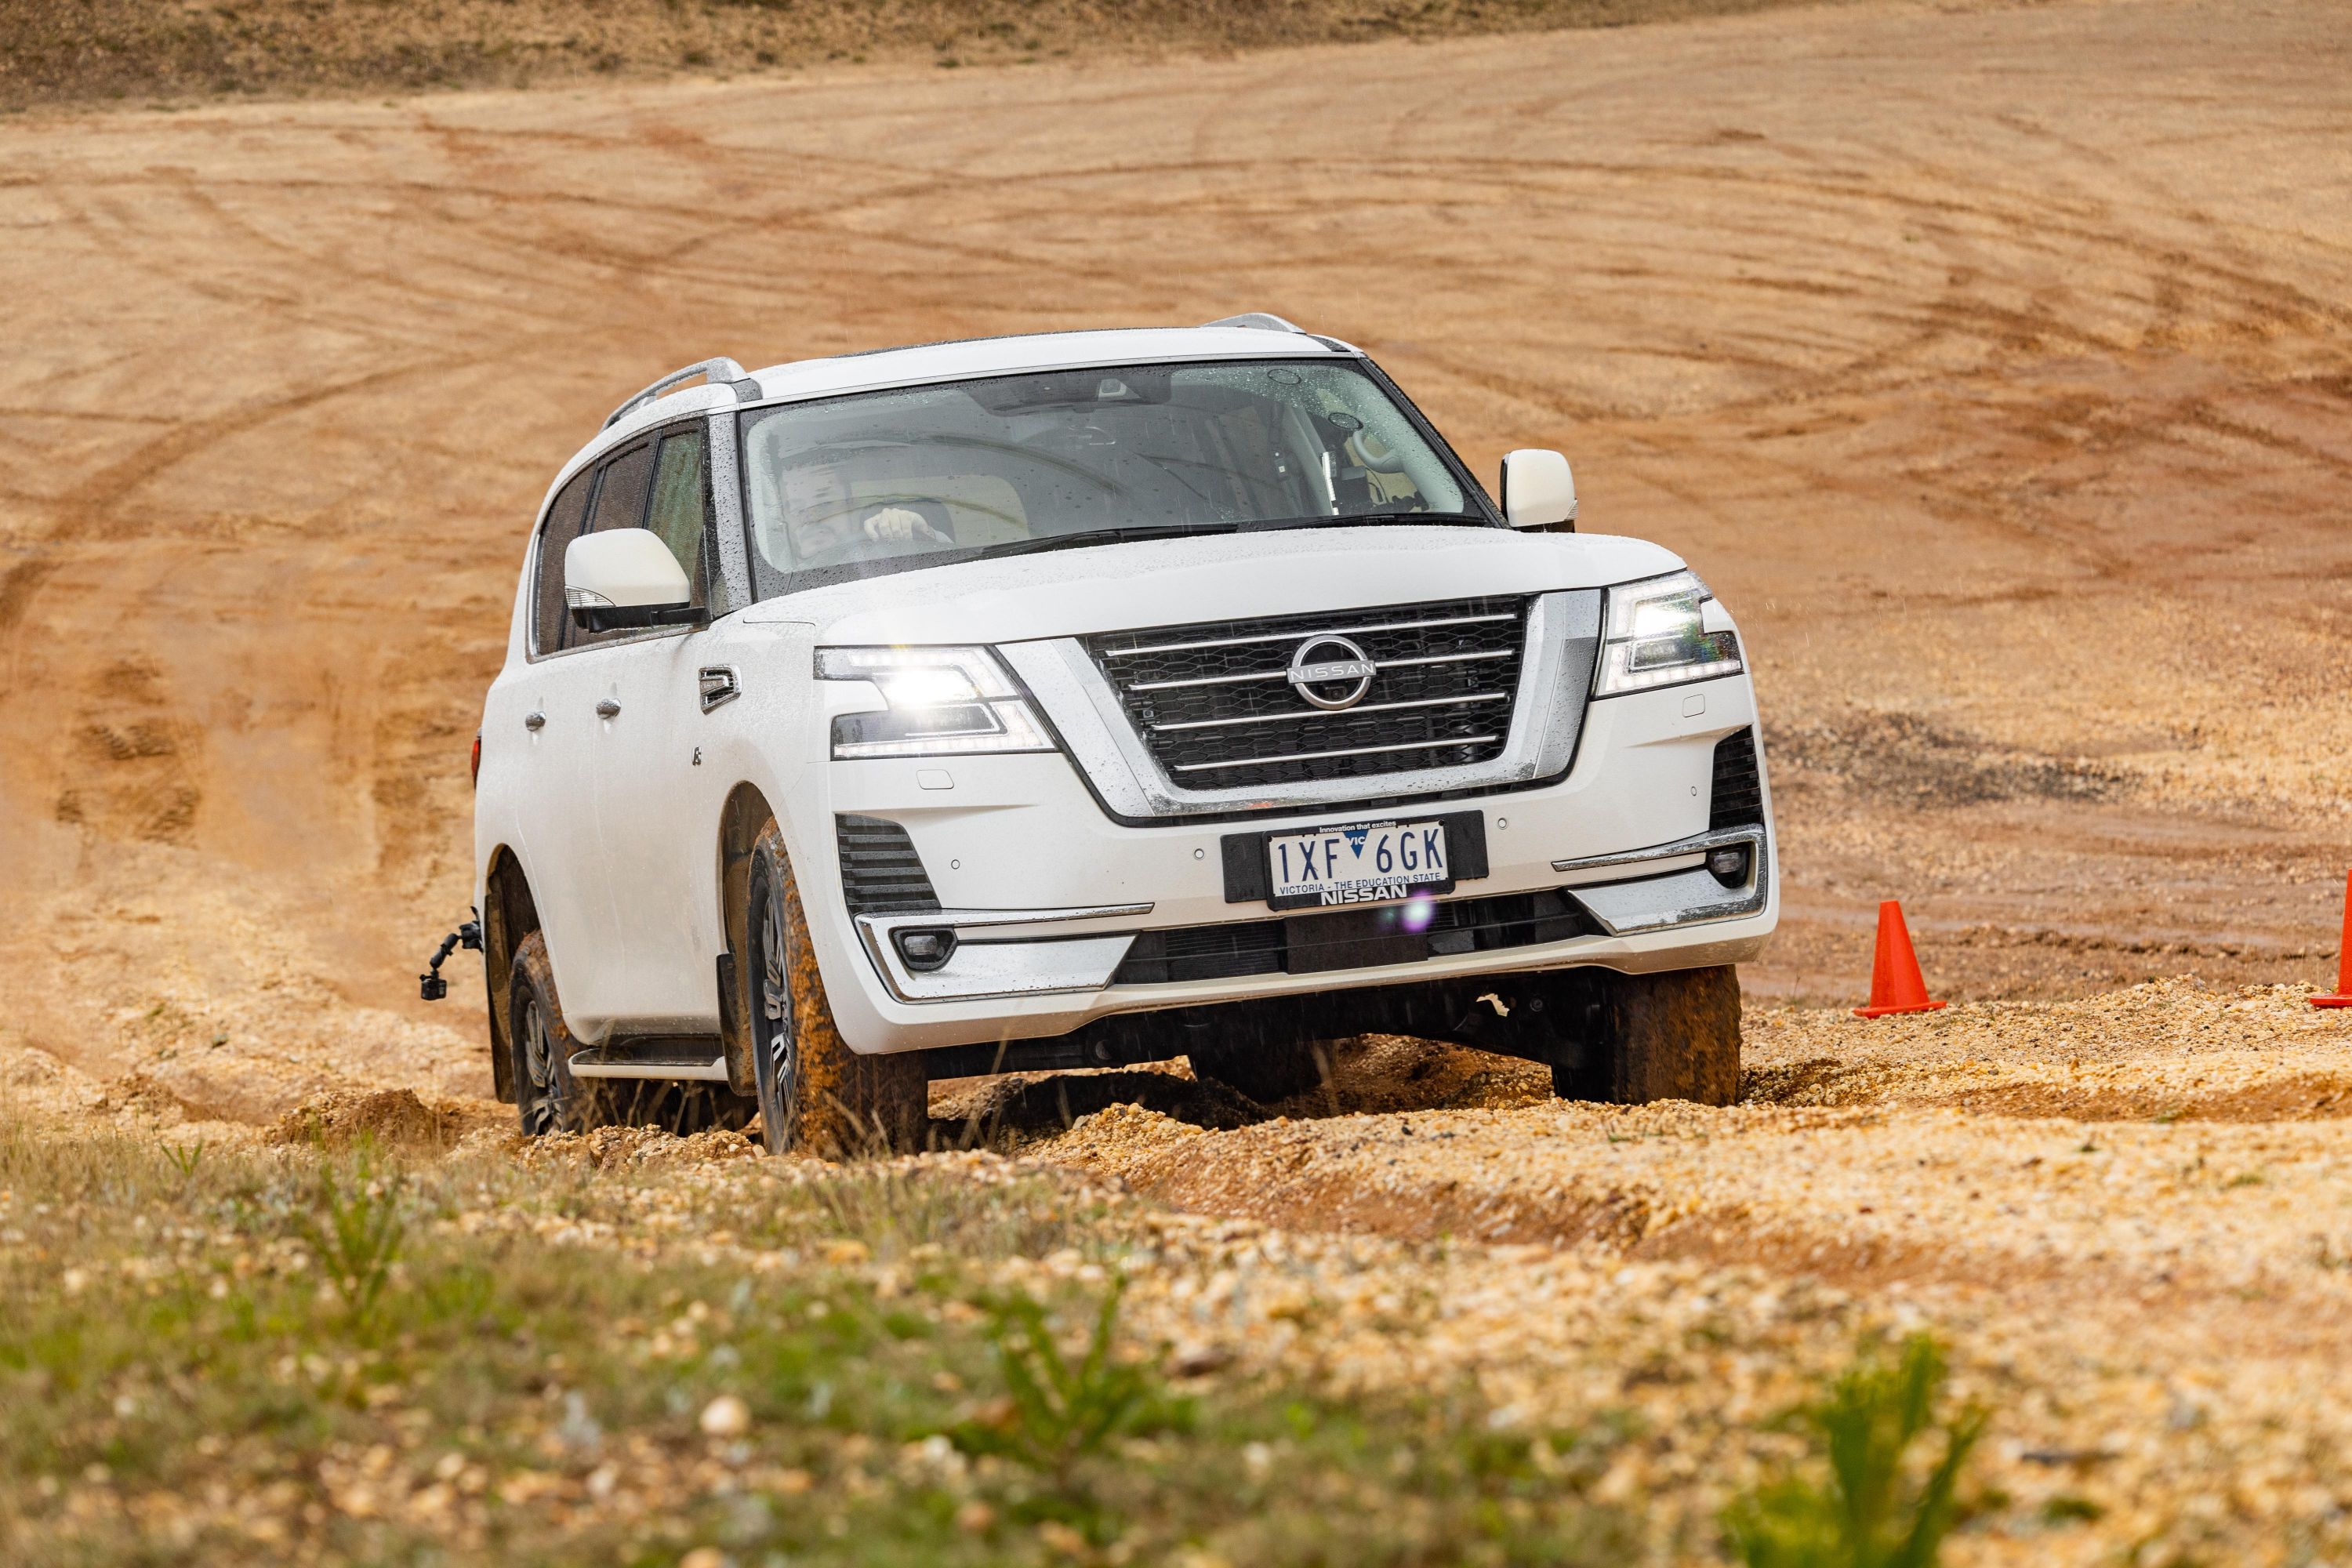 Nissan PATROL - The Legendary 4WD SUV in the city & off-road